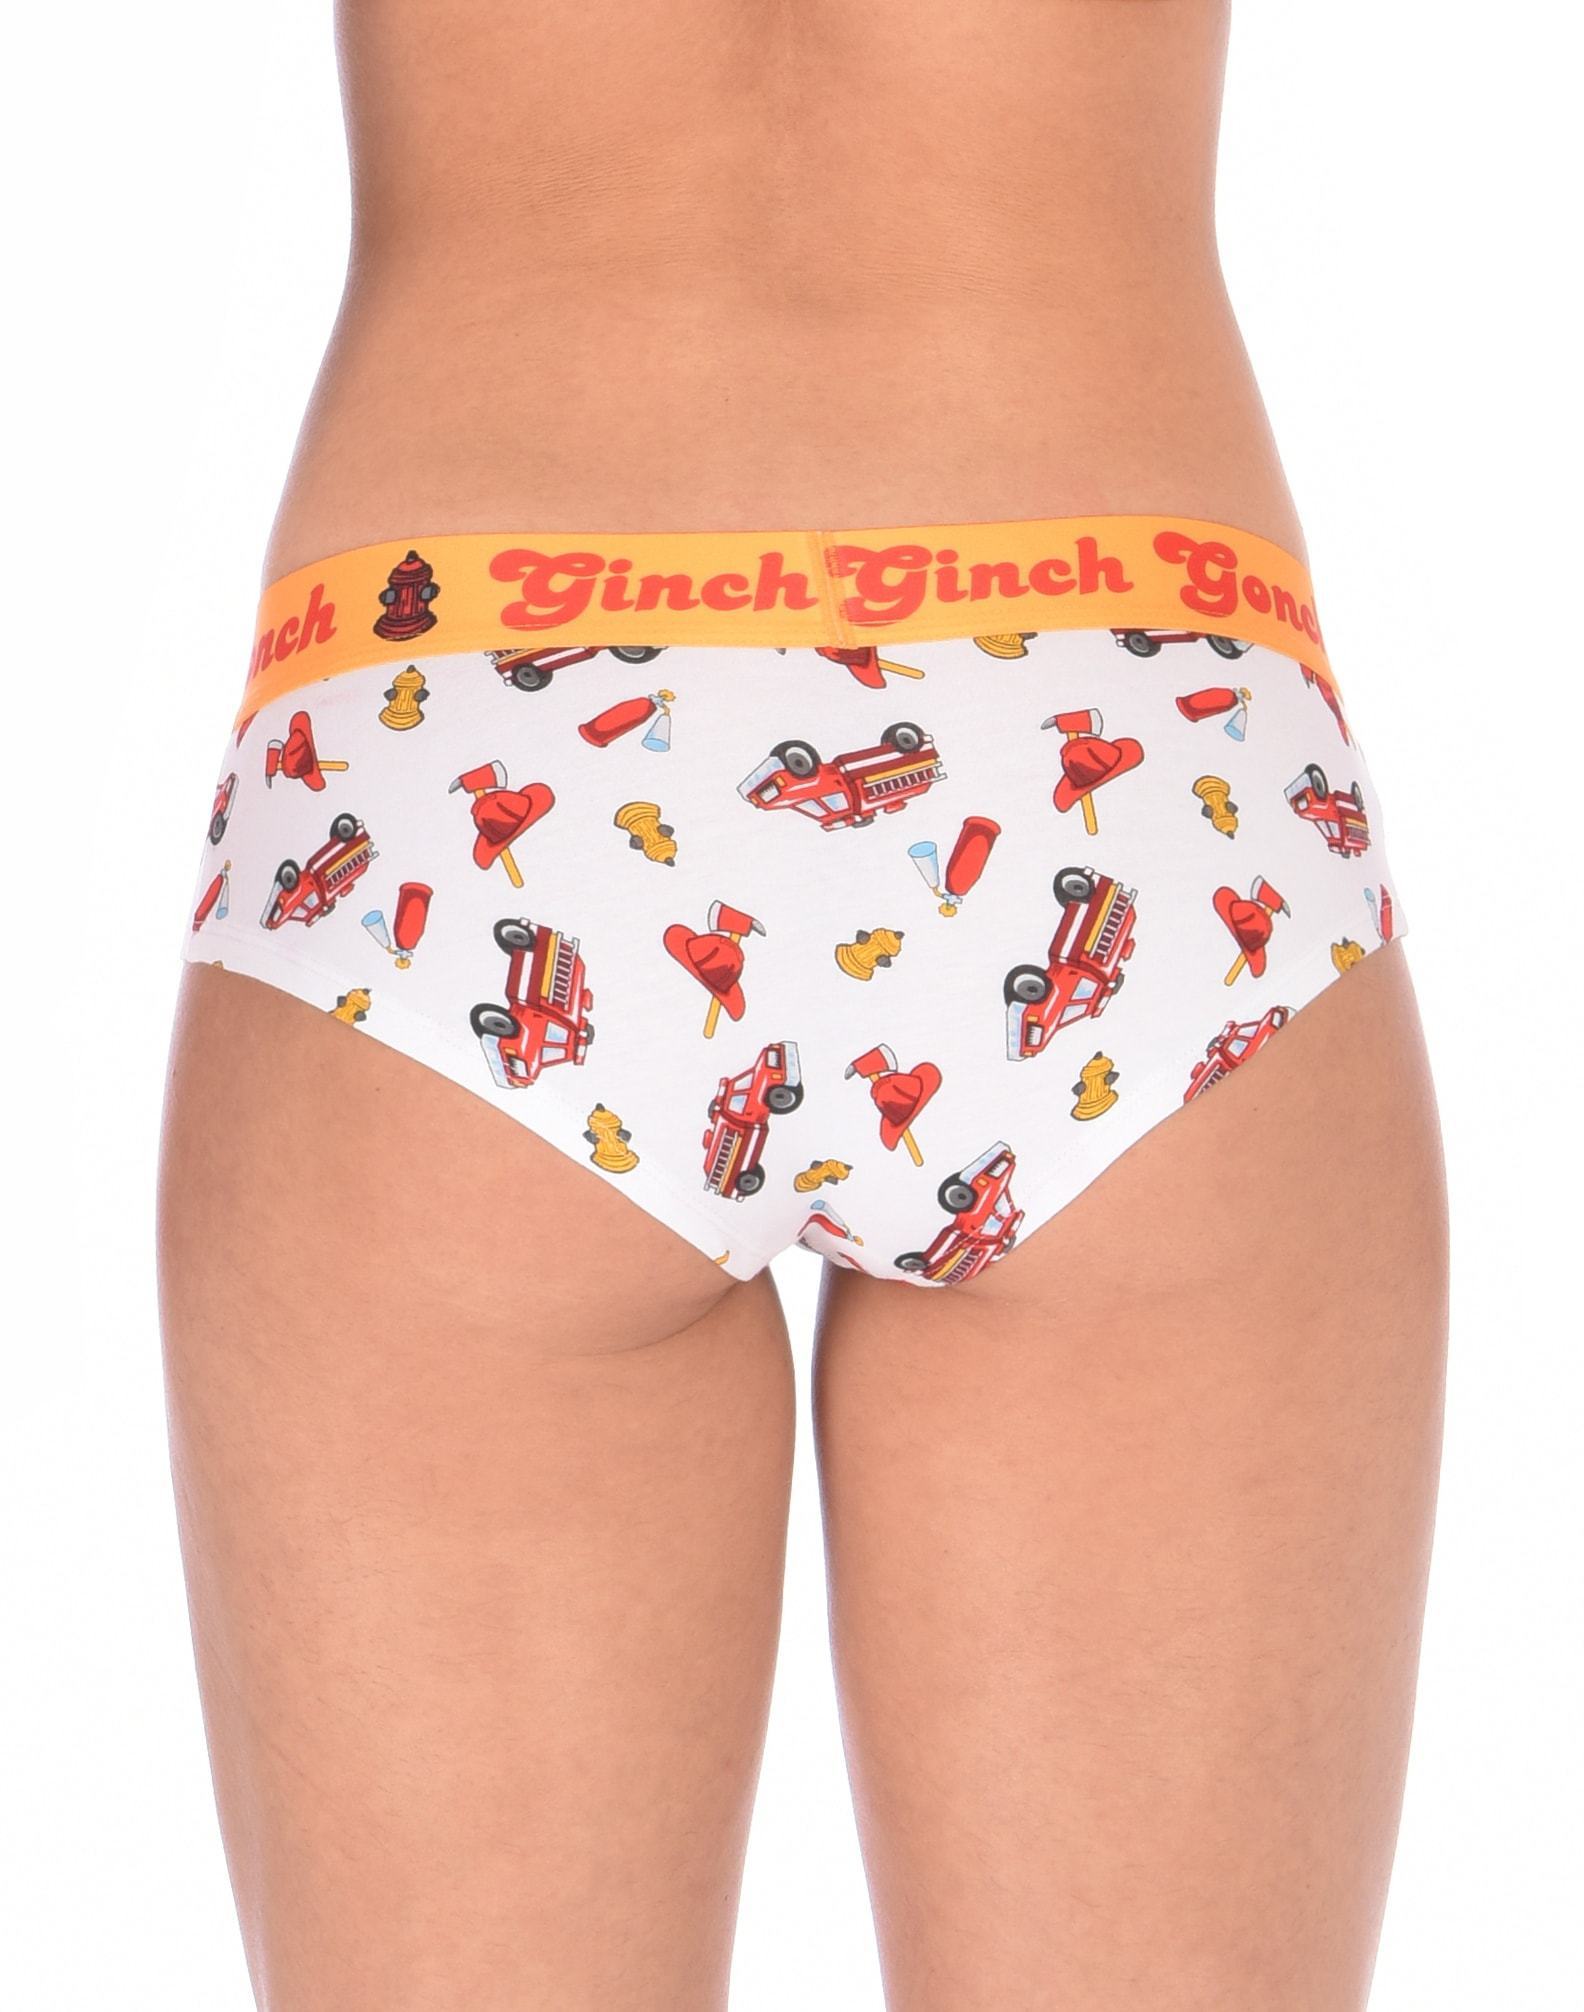 Ginch Gonch GG Fire Fighters boy cut Brief womens underwear white fabric with fire engines hats and hydrants, yellow trim and yellow printed waistband back